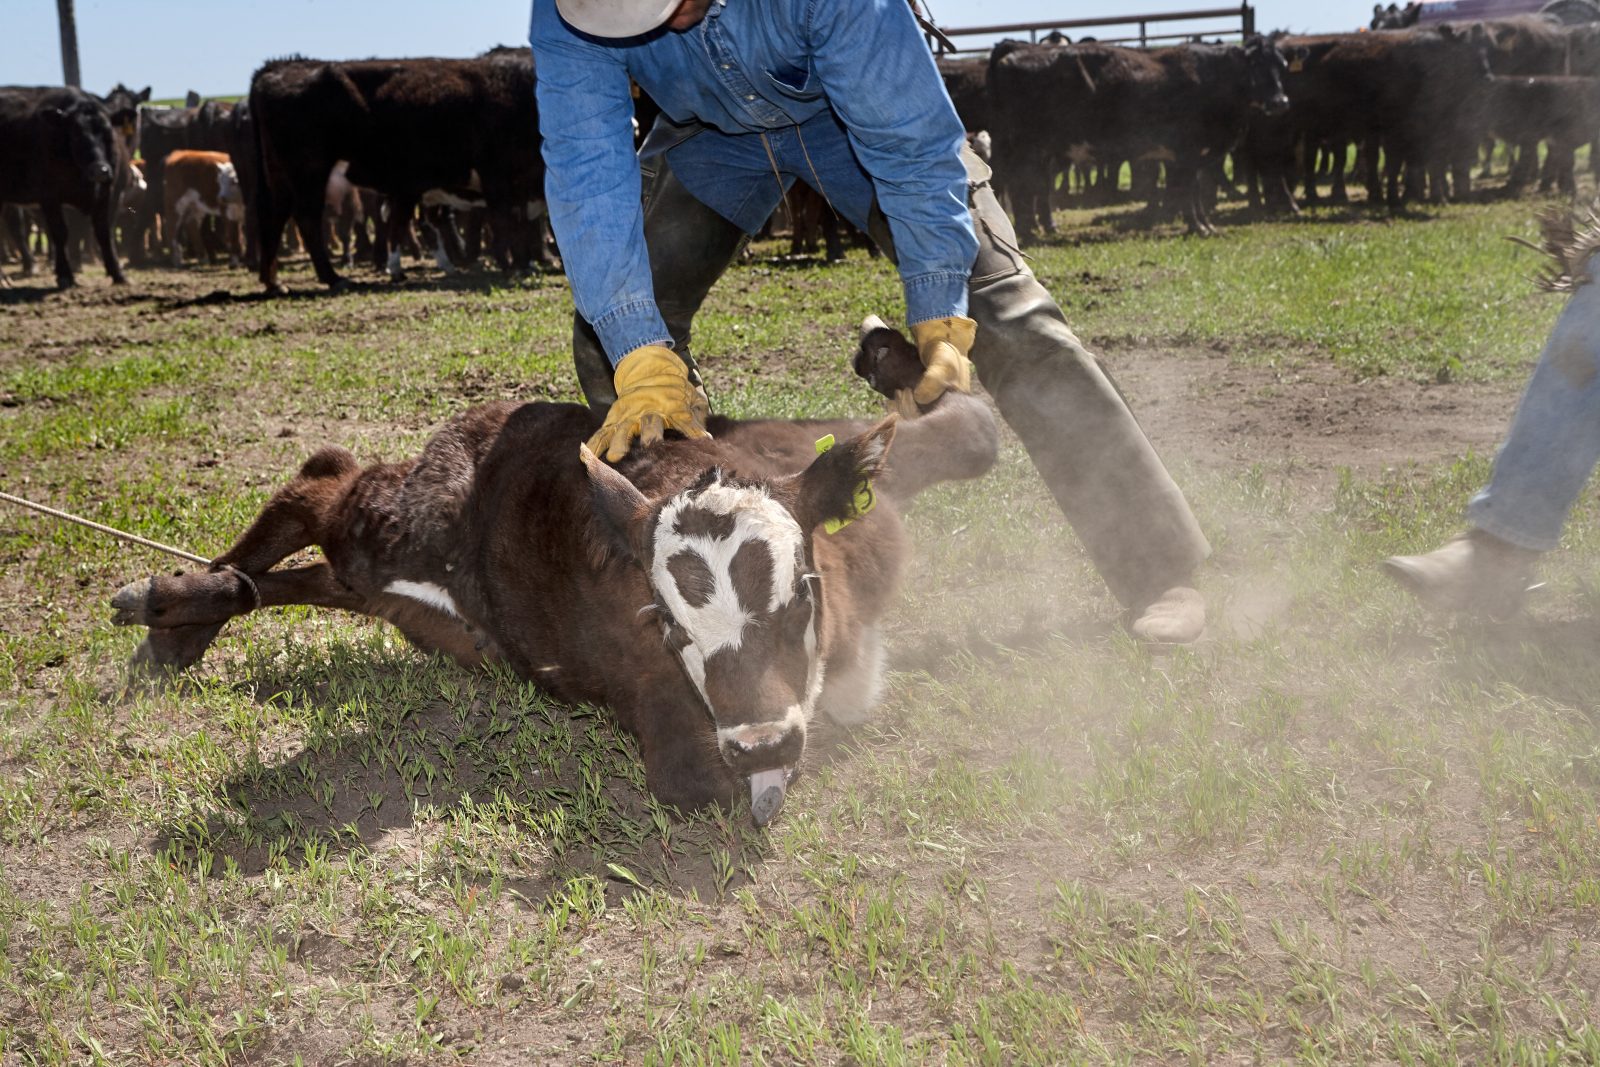 Cowboy roping a young calf for branding and castration.